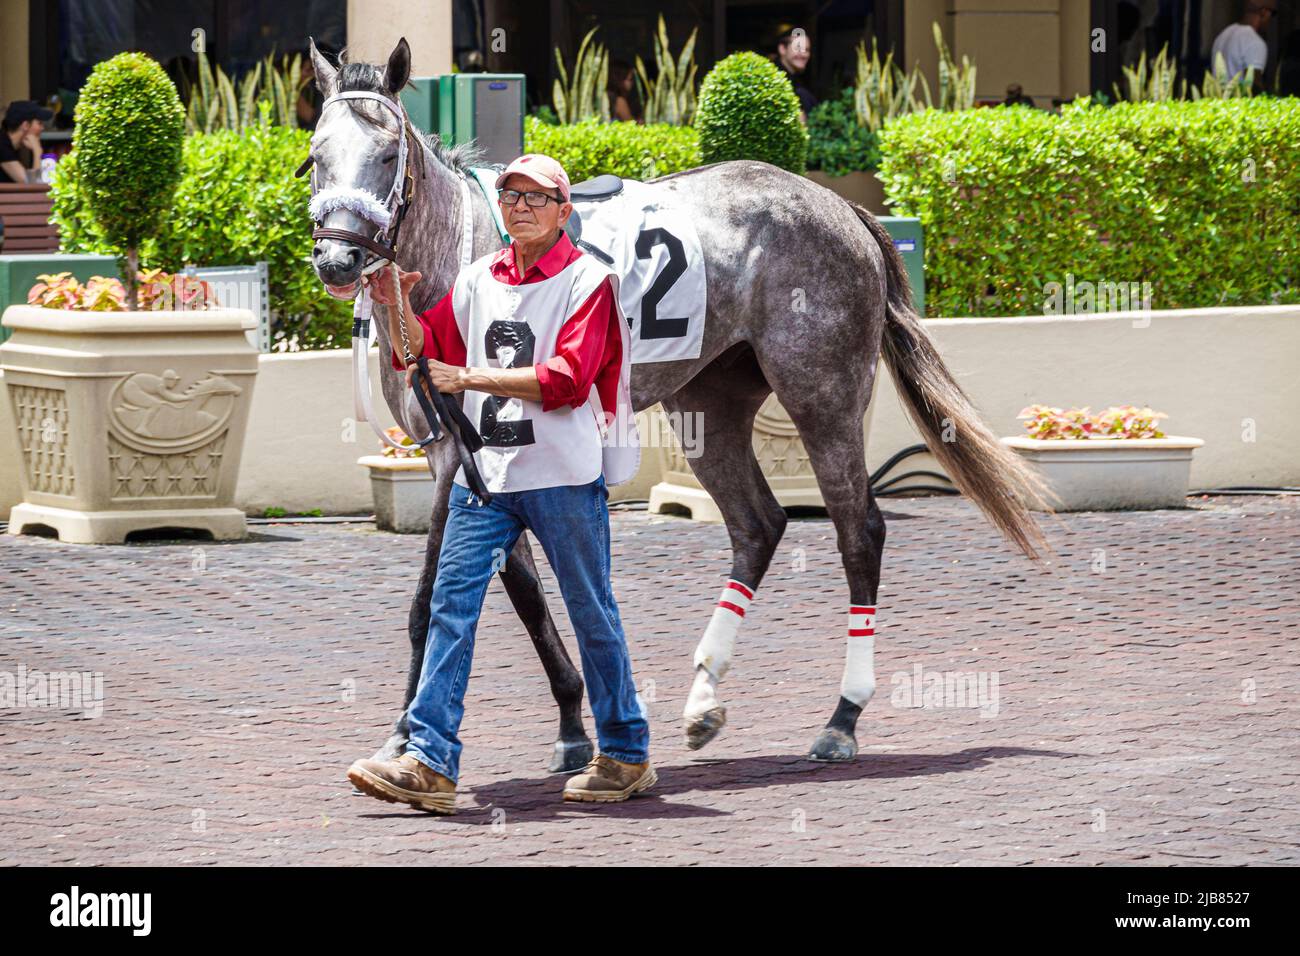 Hallandale Florida Miami,Gulfstream Park racetrack racecourse thoroughbred horse racing track,pre-race warm up paddock walking ring groom stable boy h Stock Photo